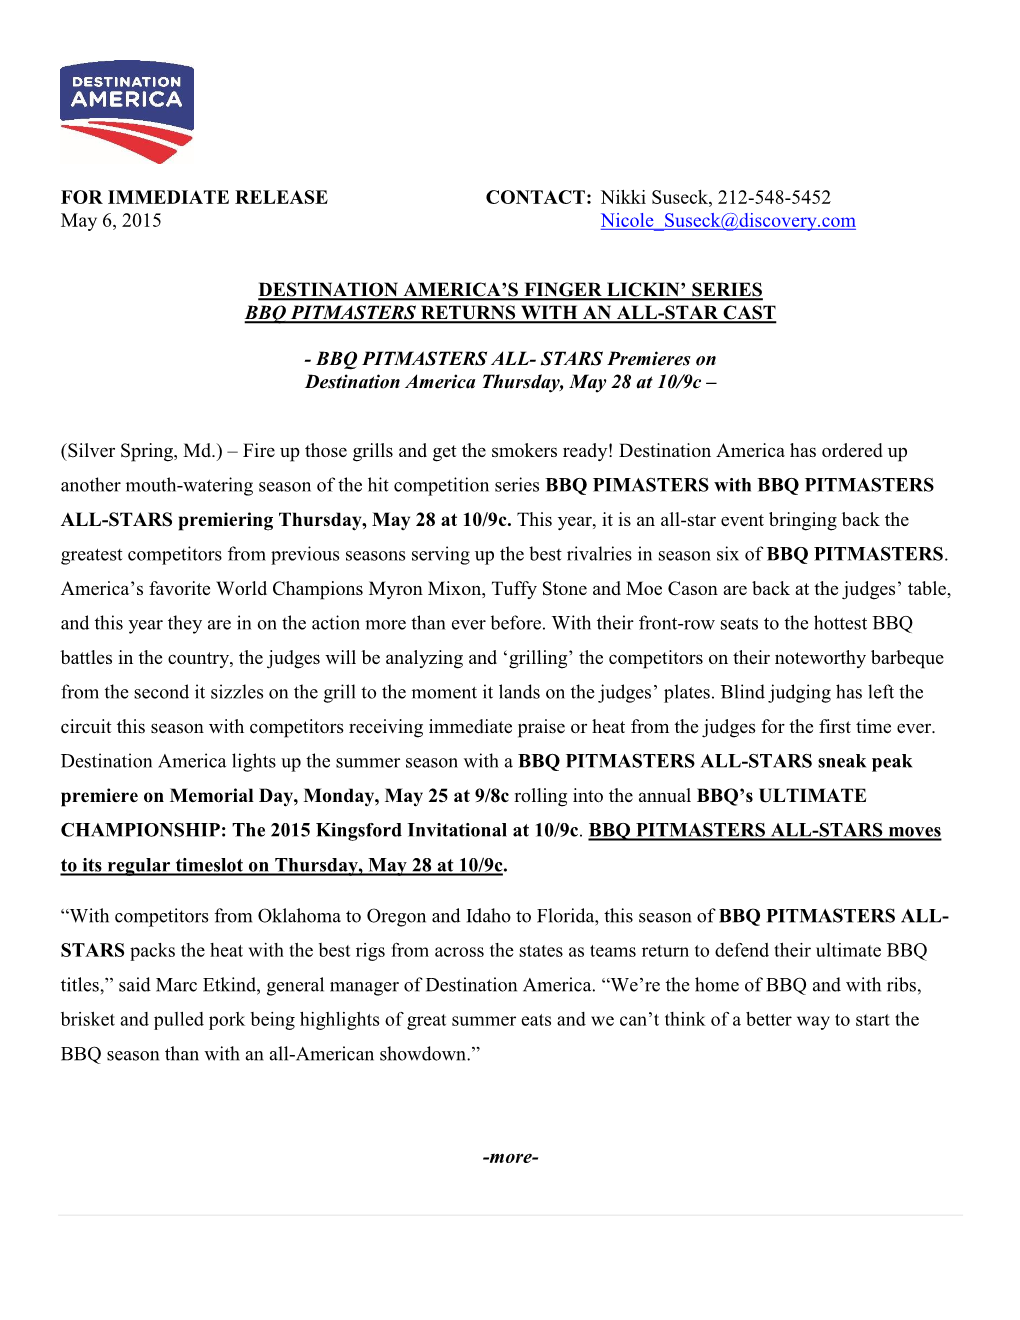 FOR IMMEDIATE RELEASE CONTACT: Nikki Suseck, 212-548-5452 May 6, 2015 Nicole Suseck@Discovery.Com